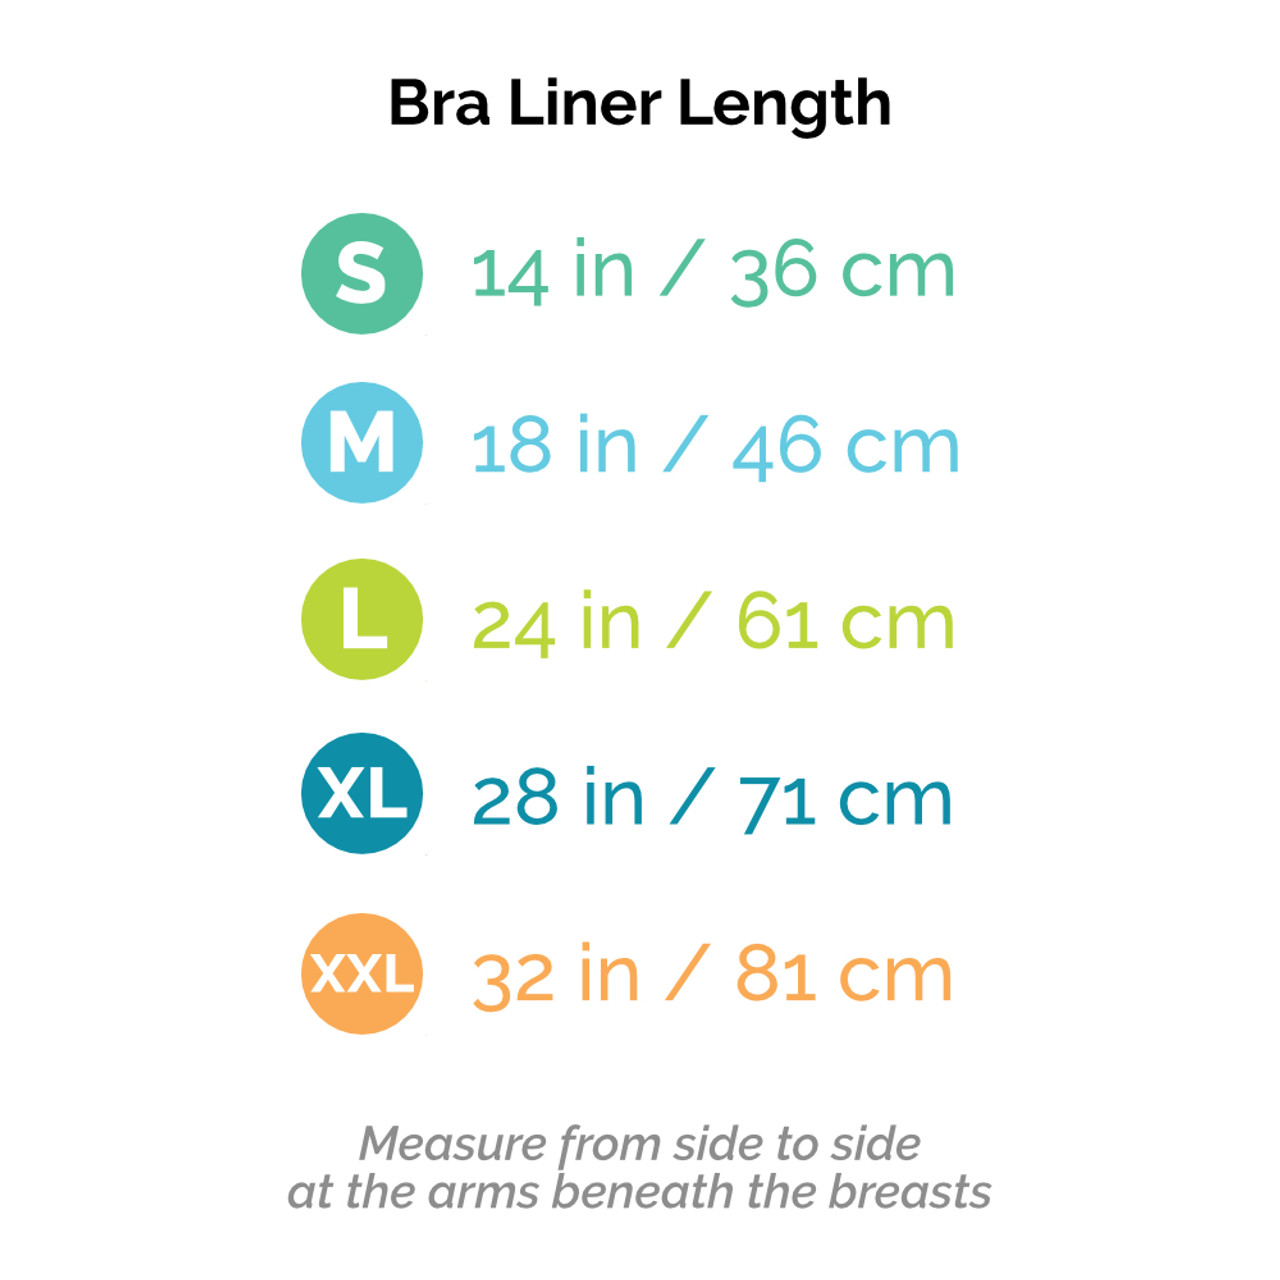 More of Me to Love Bra Liner